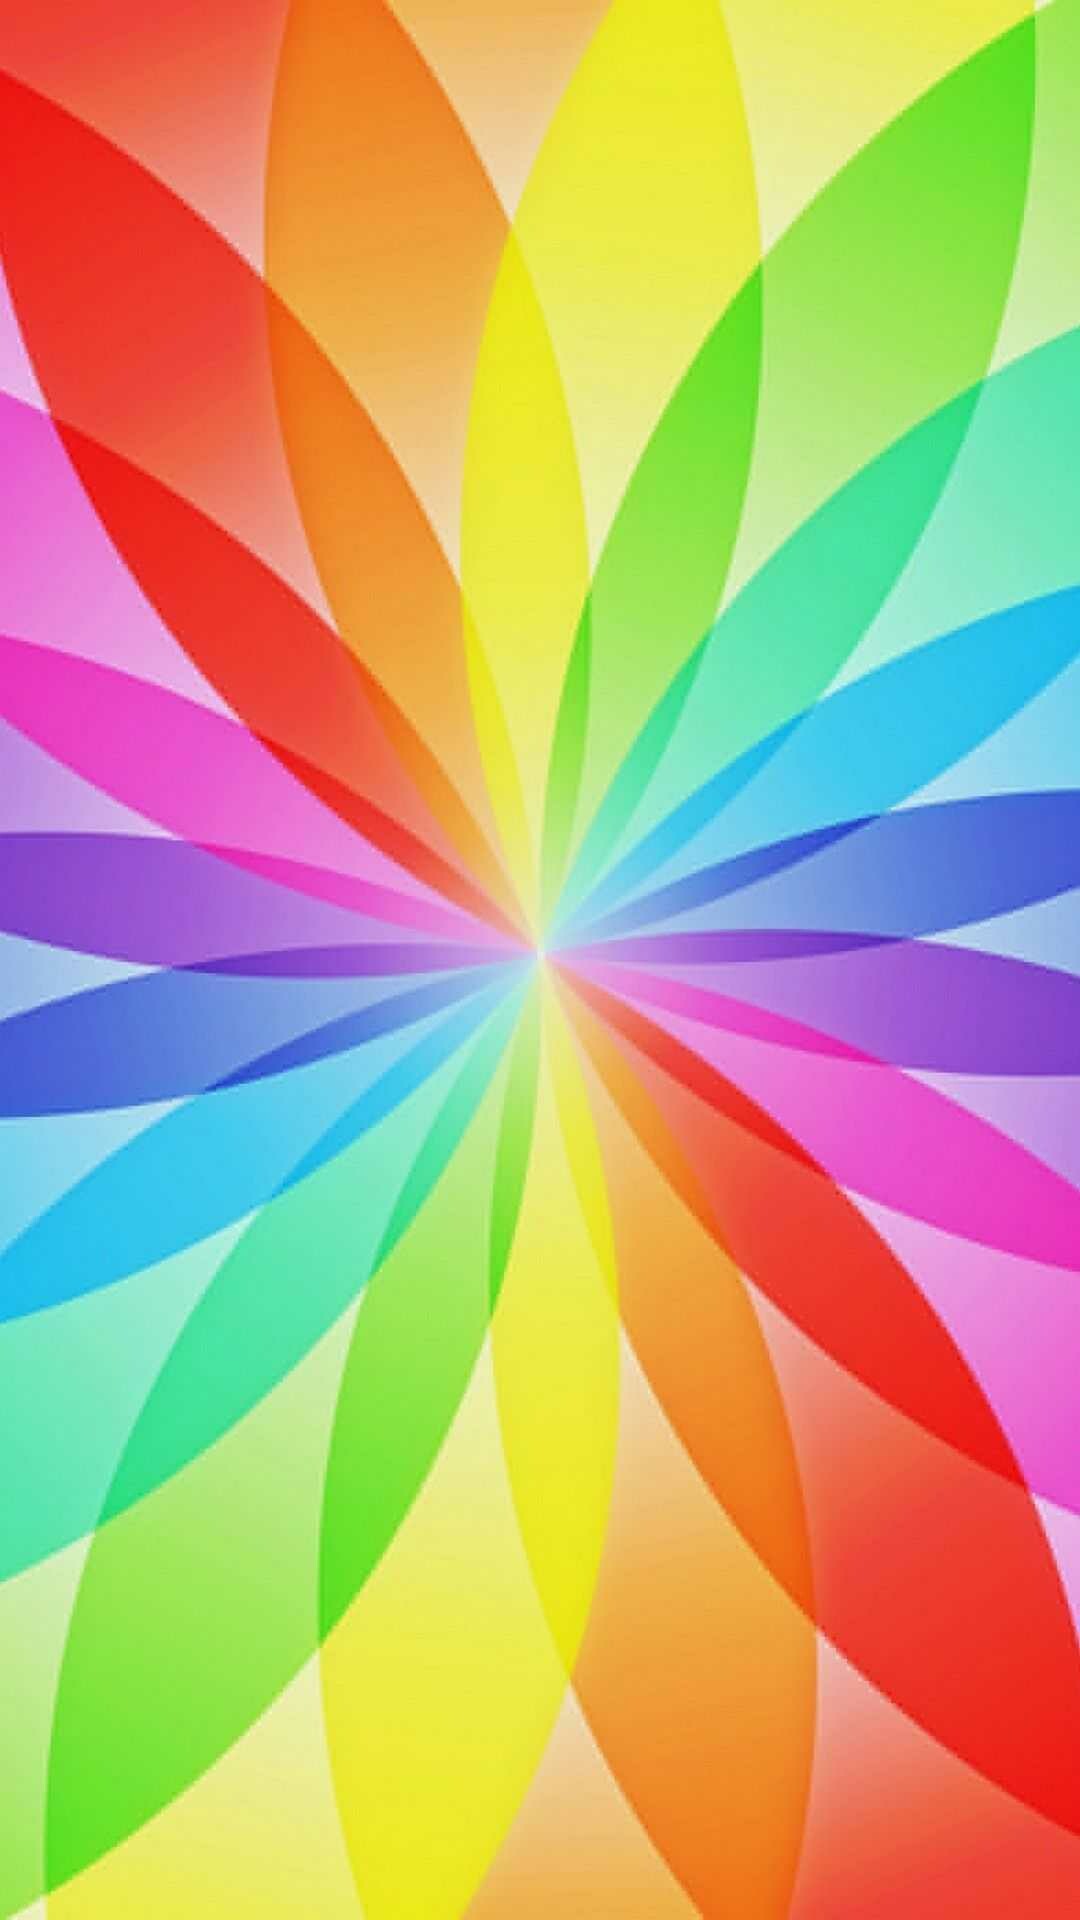 Rainbow Colors: Low polygonal art, Tints and shades, Palette. 1080x1920 Full HD Wallpaper.